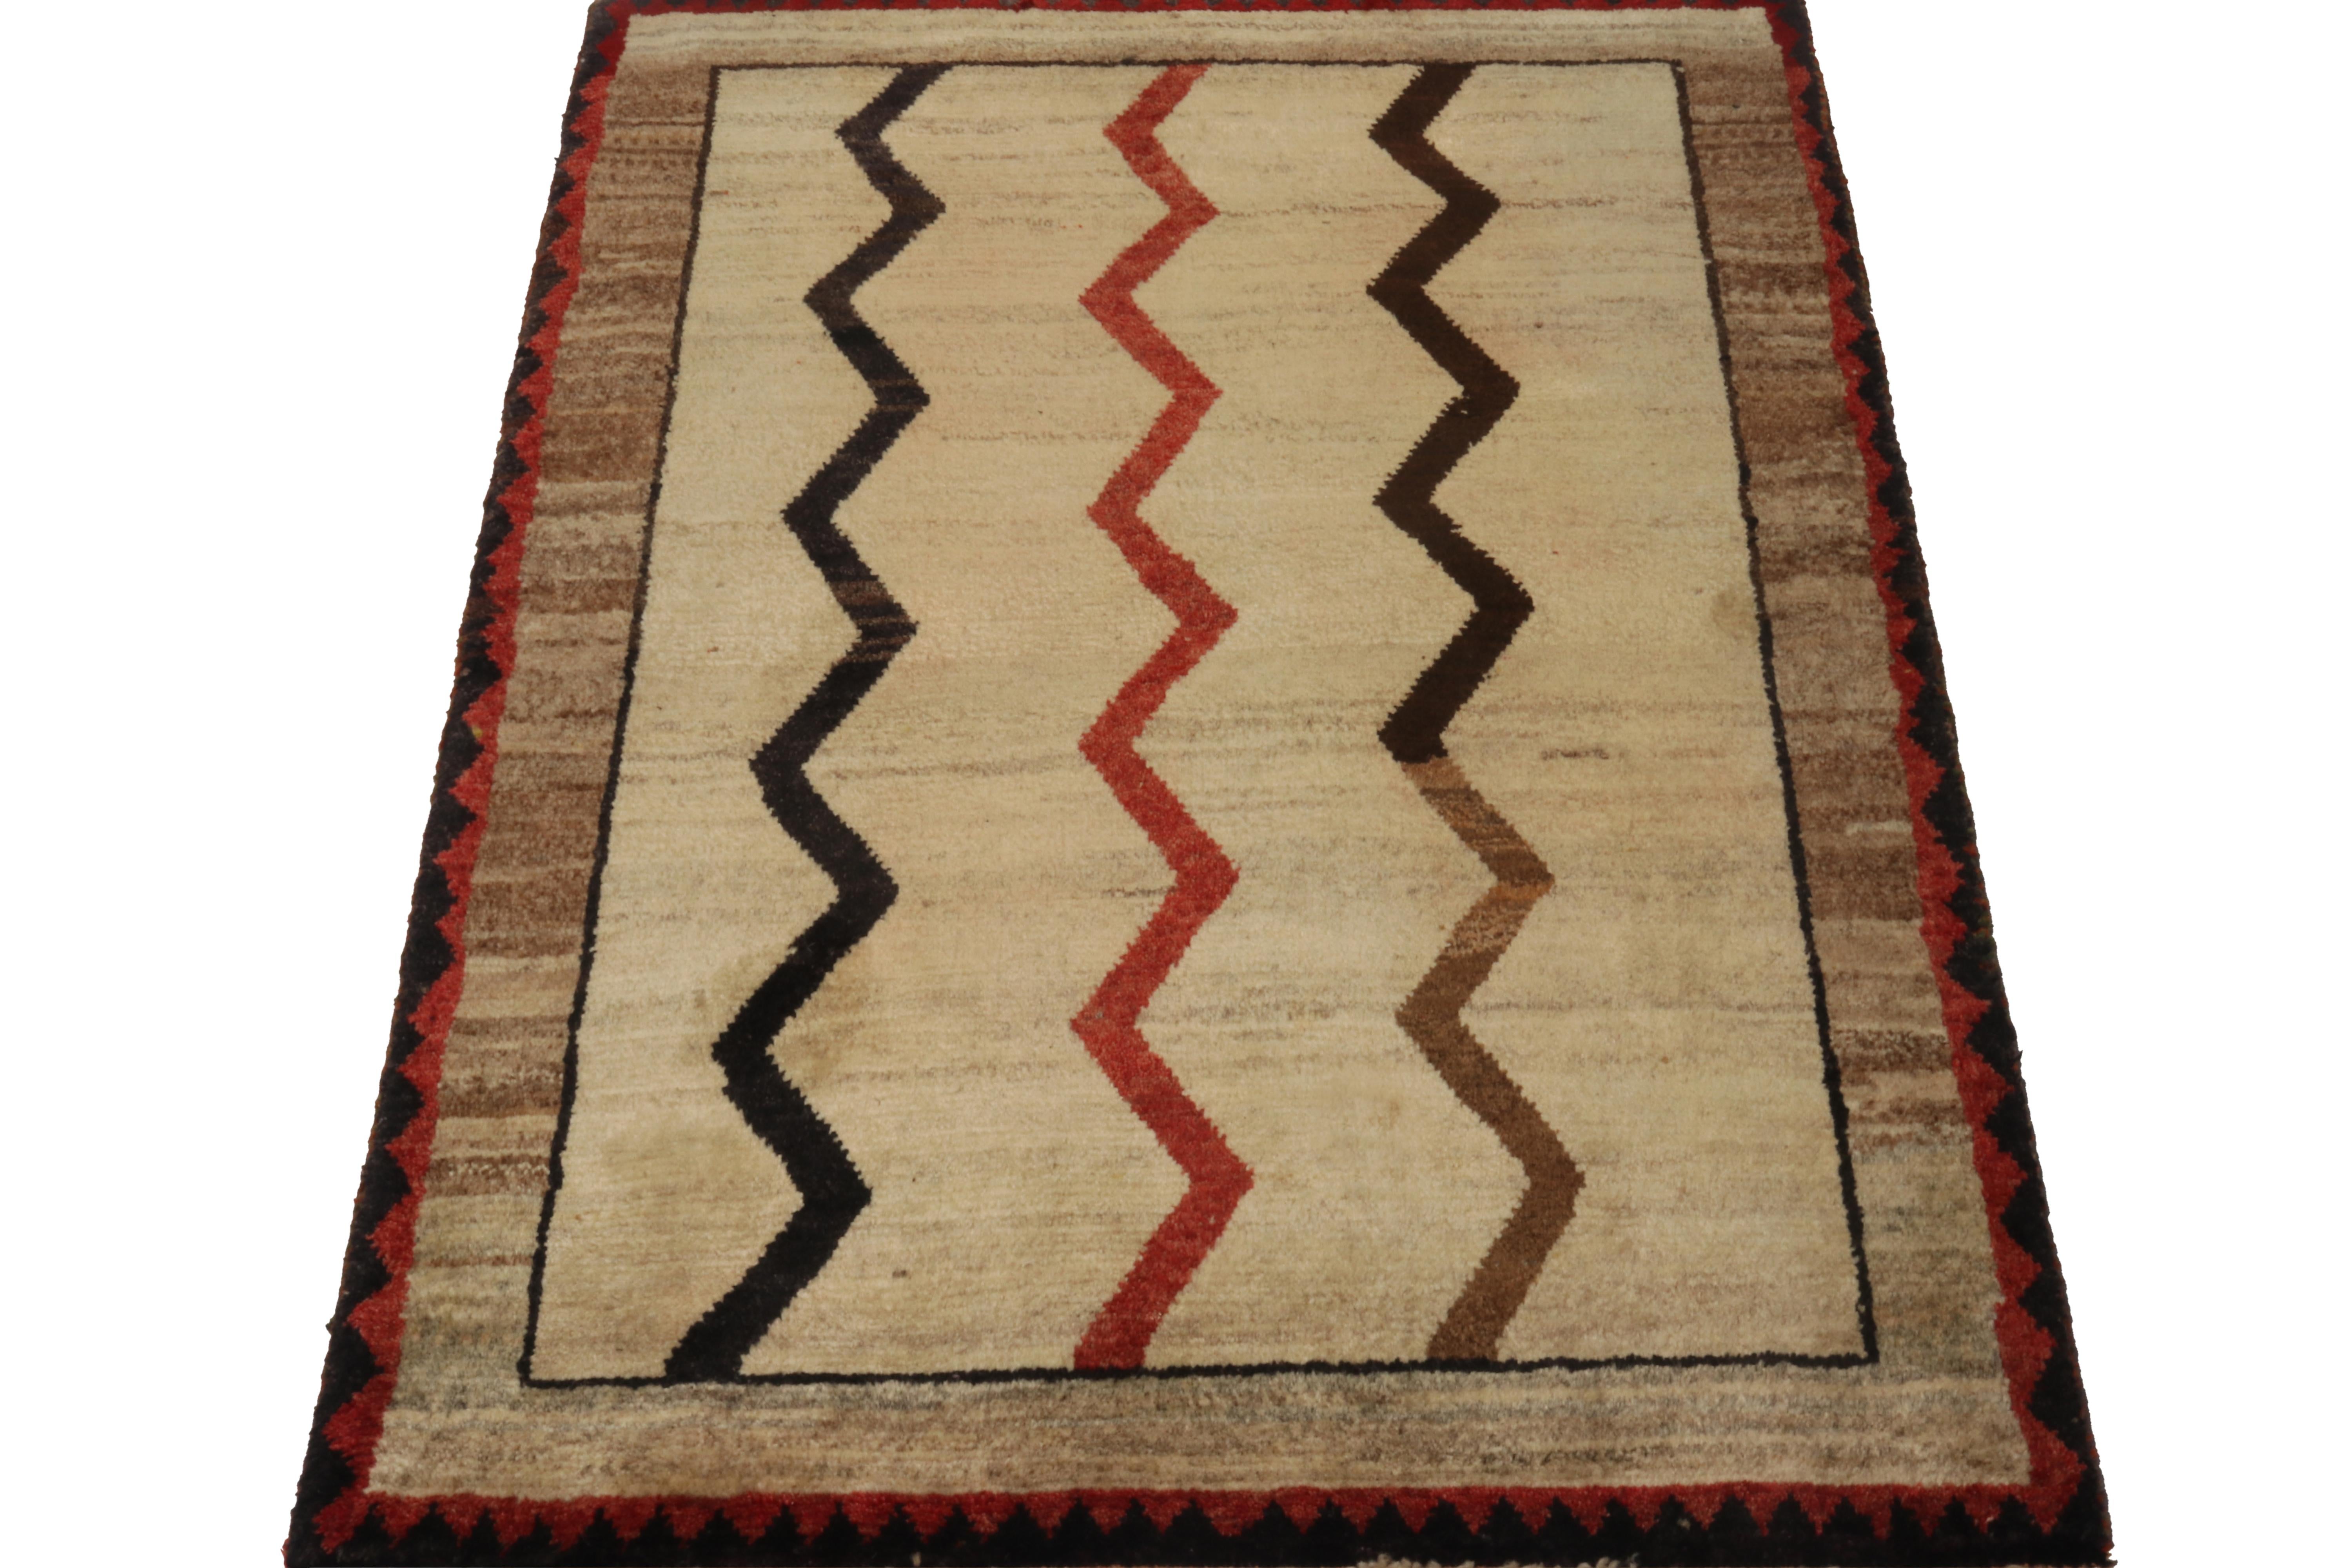 A vintage 3x4 Persian Gabbeh rug in the latest entries to Rug & Kilim’s curation of rare tribal pieces. Hand-knotted in wool circa 1950-1960.

On the Design:

This pattern enjoys chevrons in red & black with a bold, vibrant presenct